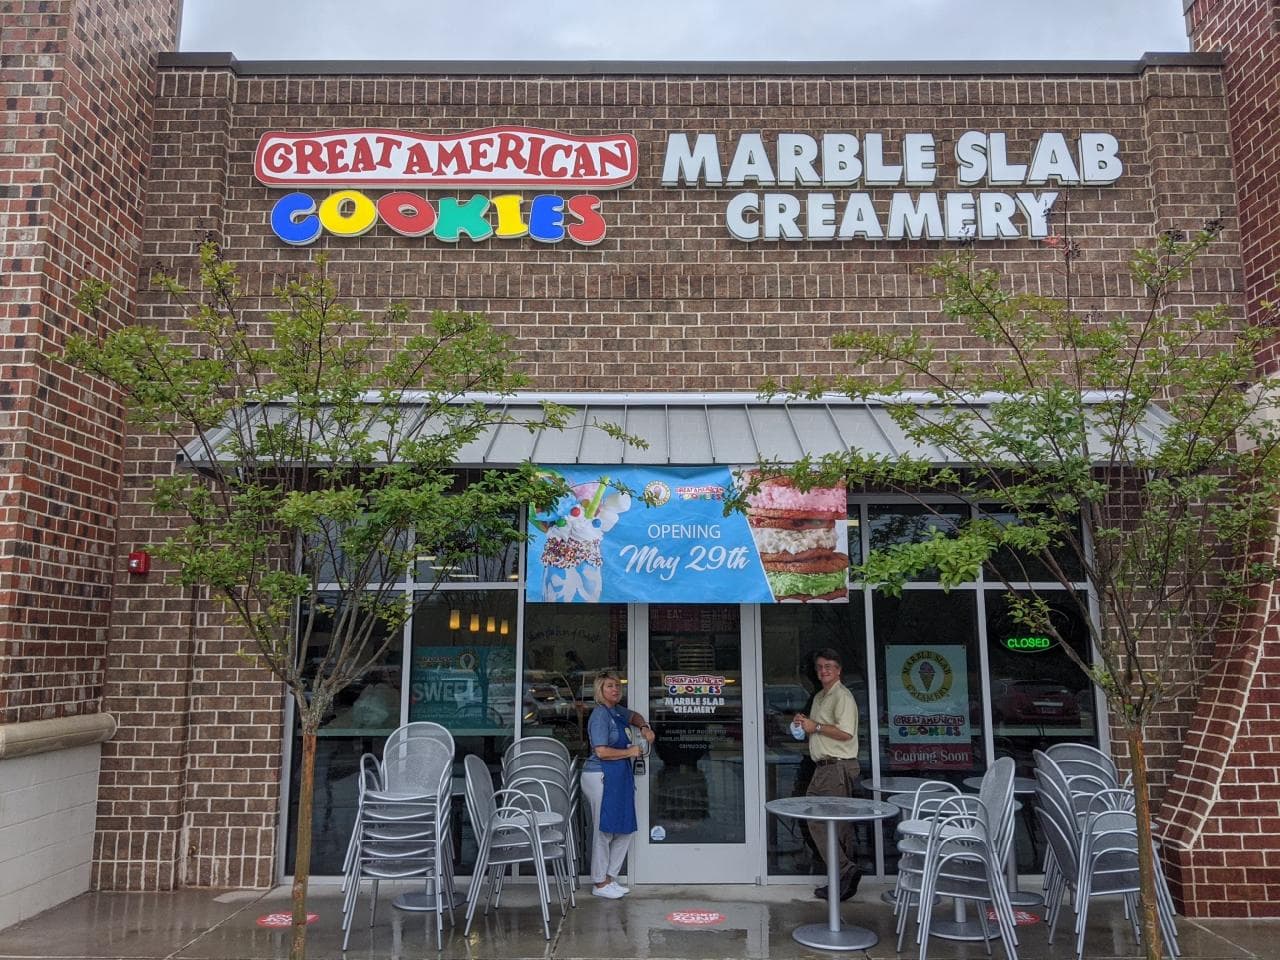 Cookies and Cream: Great American Cookie Company and Marble Slab Creamery opening in Trussville Friday